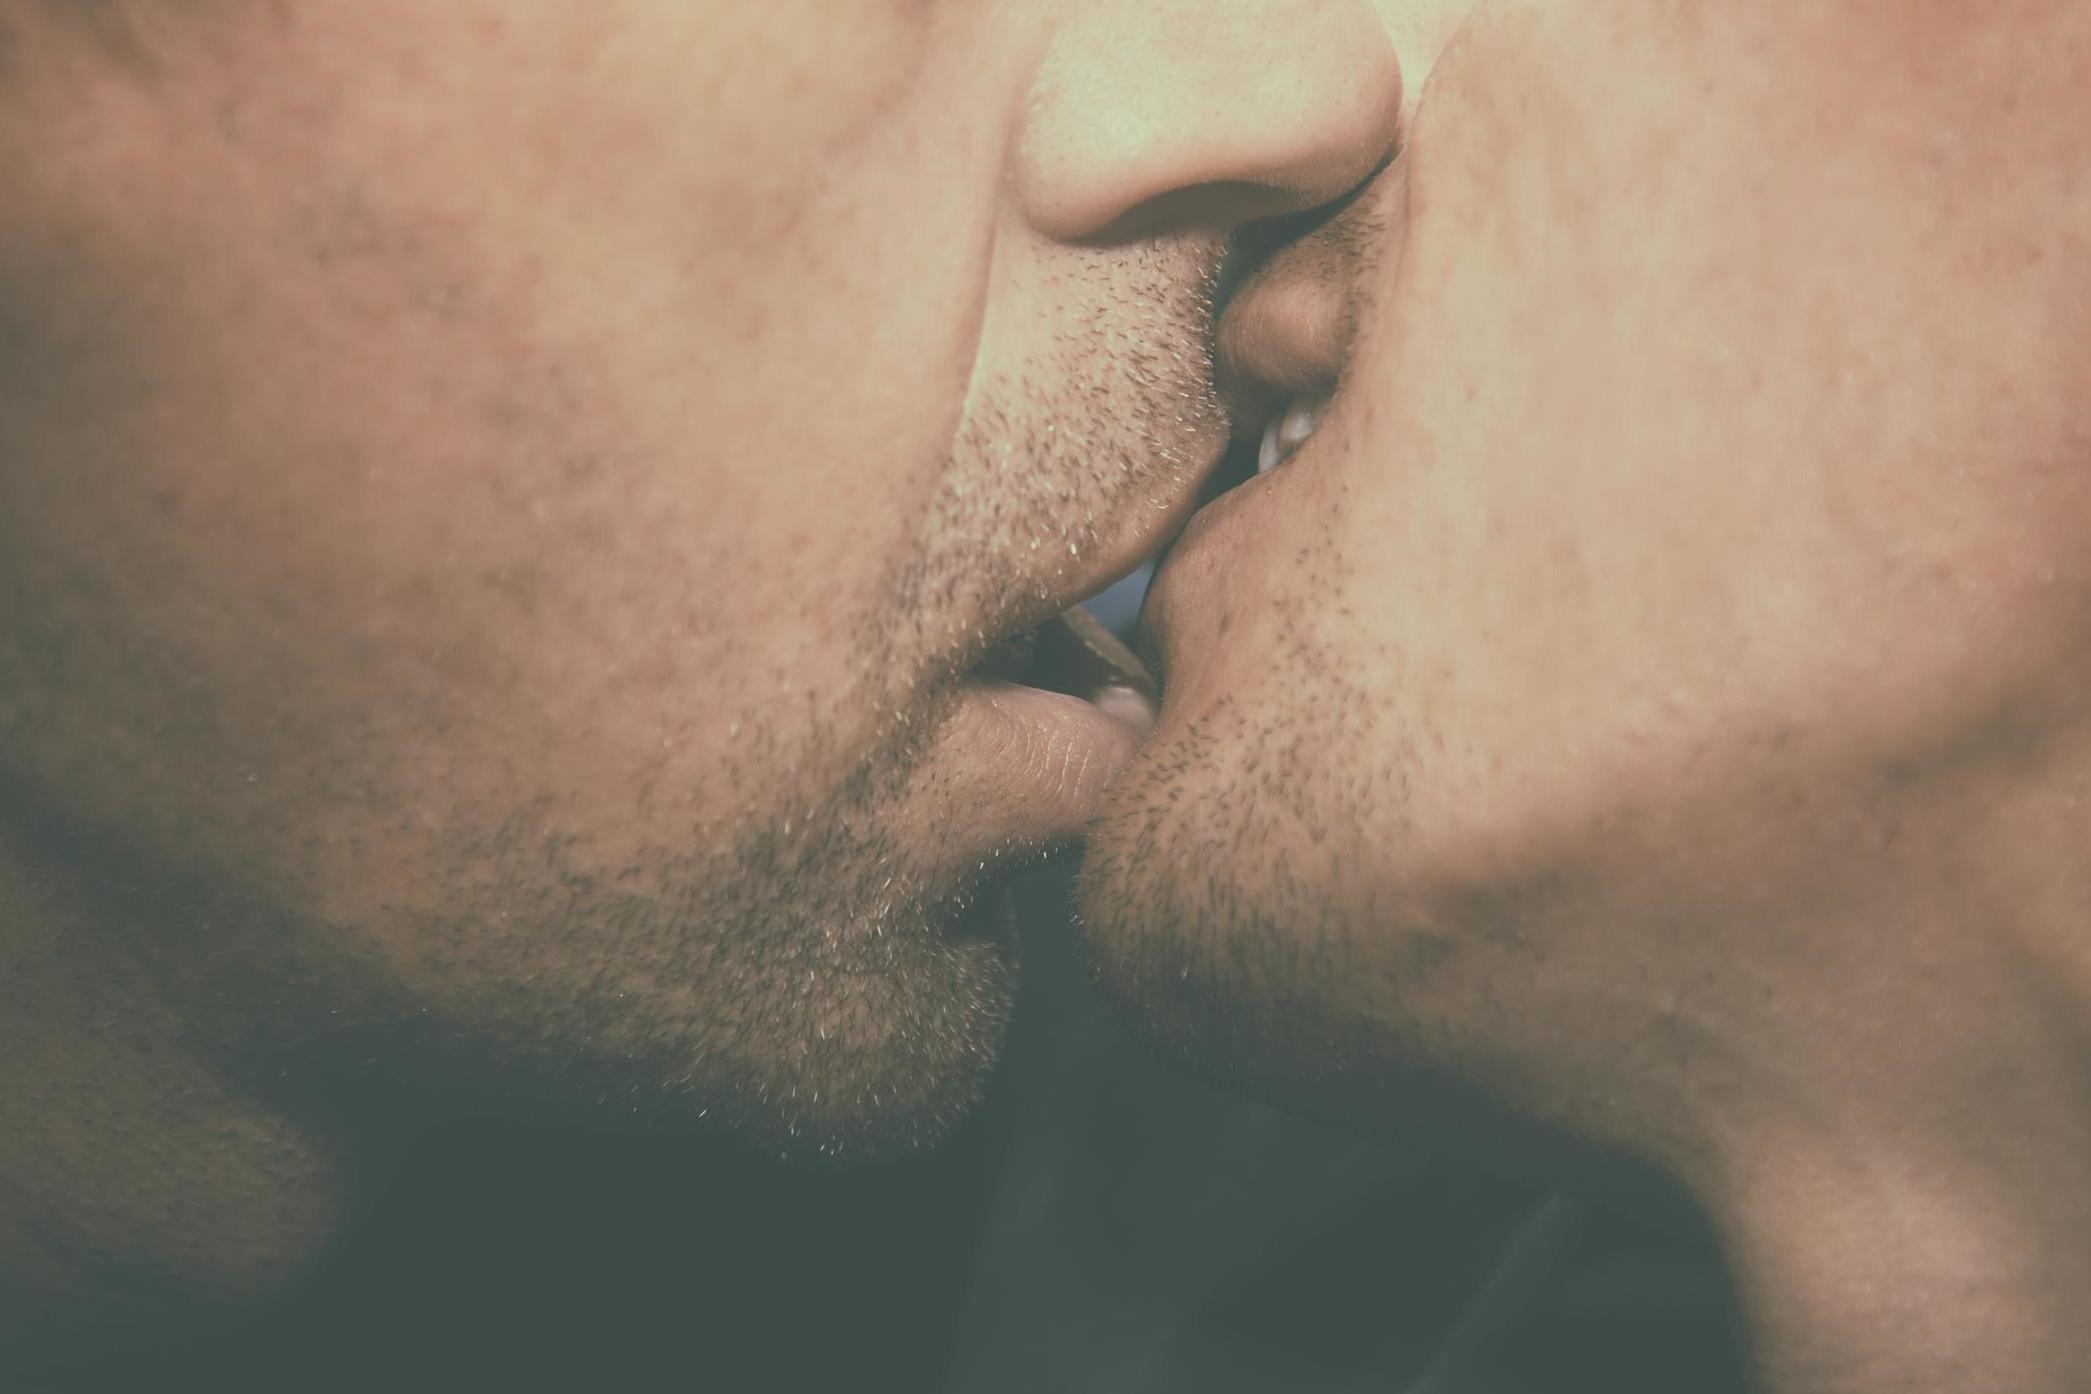 French kissing could be unexplored cause of throat gonorrhea The Independent The Independent